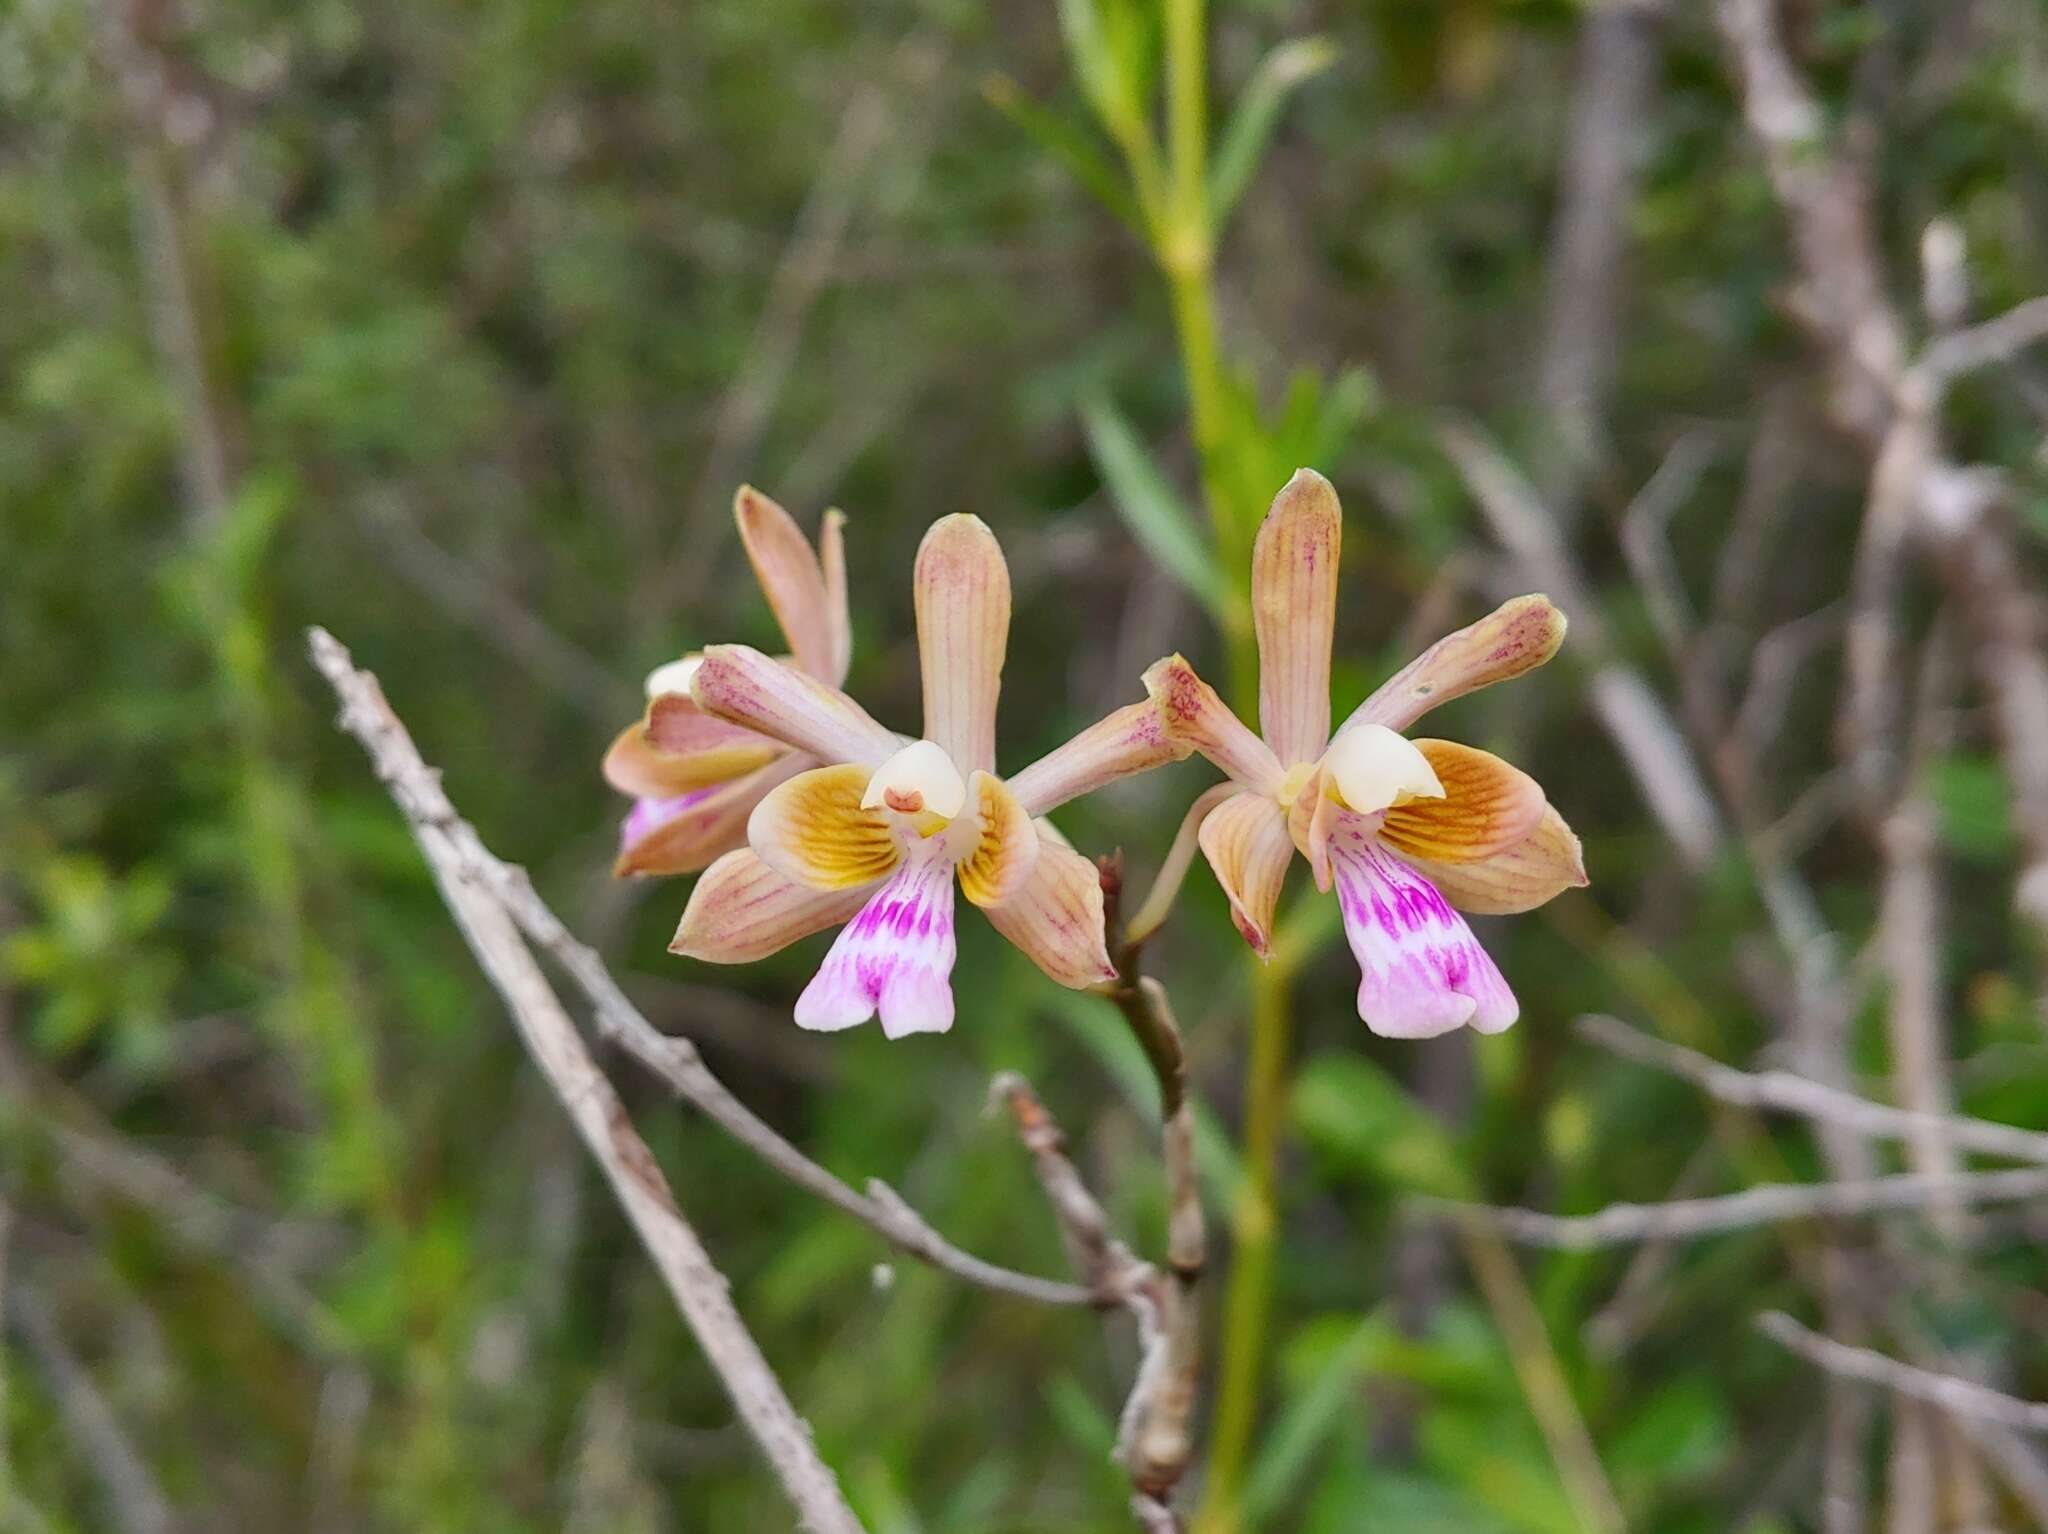 Image of Krug's peacock orchid